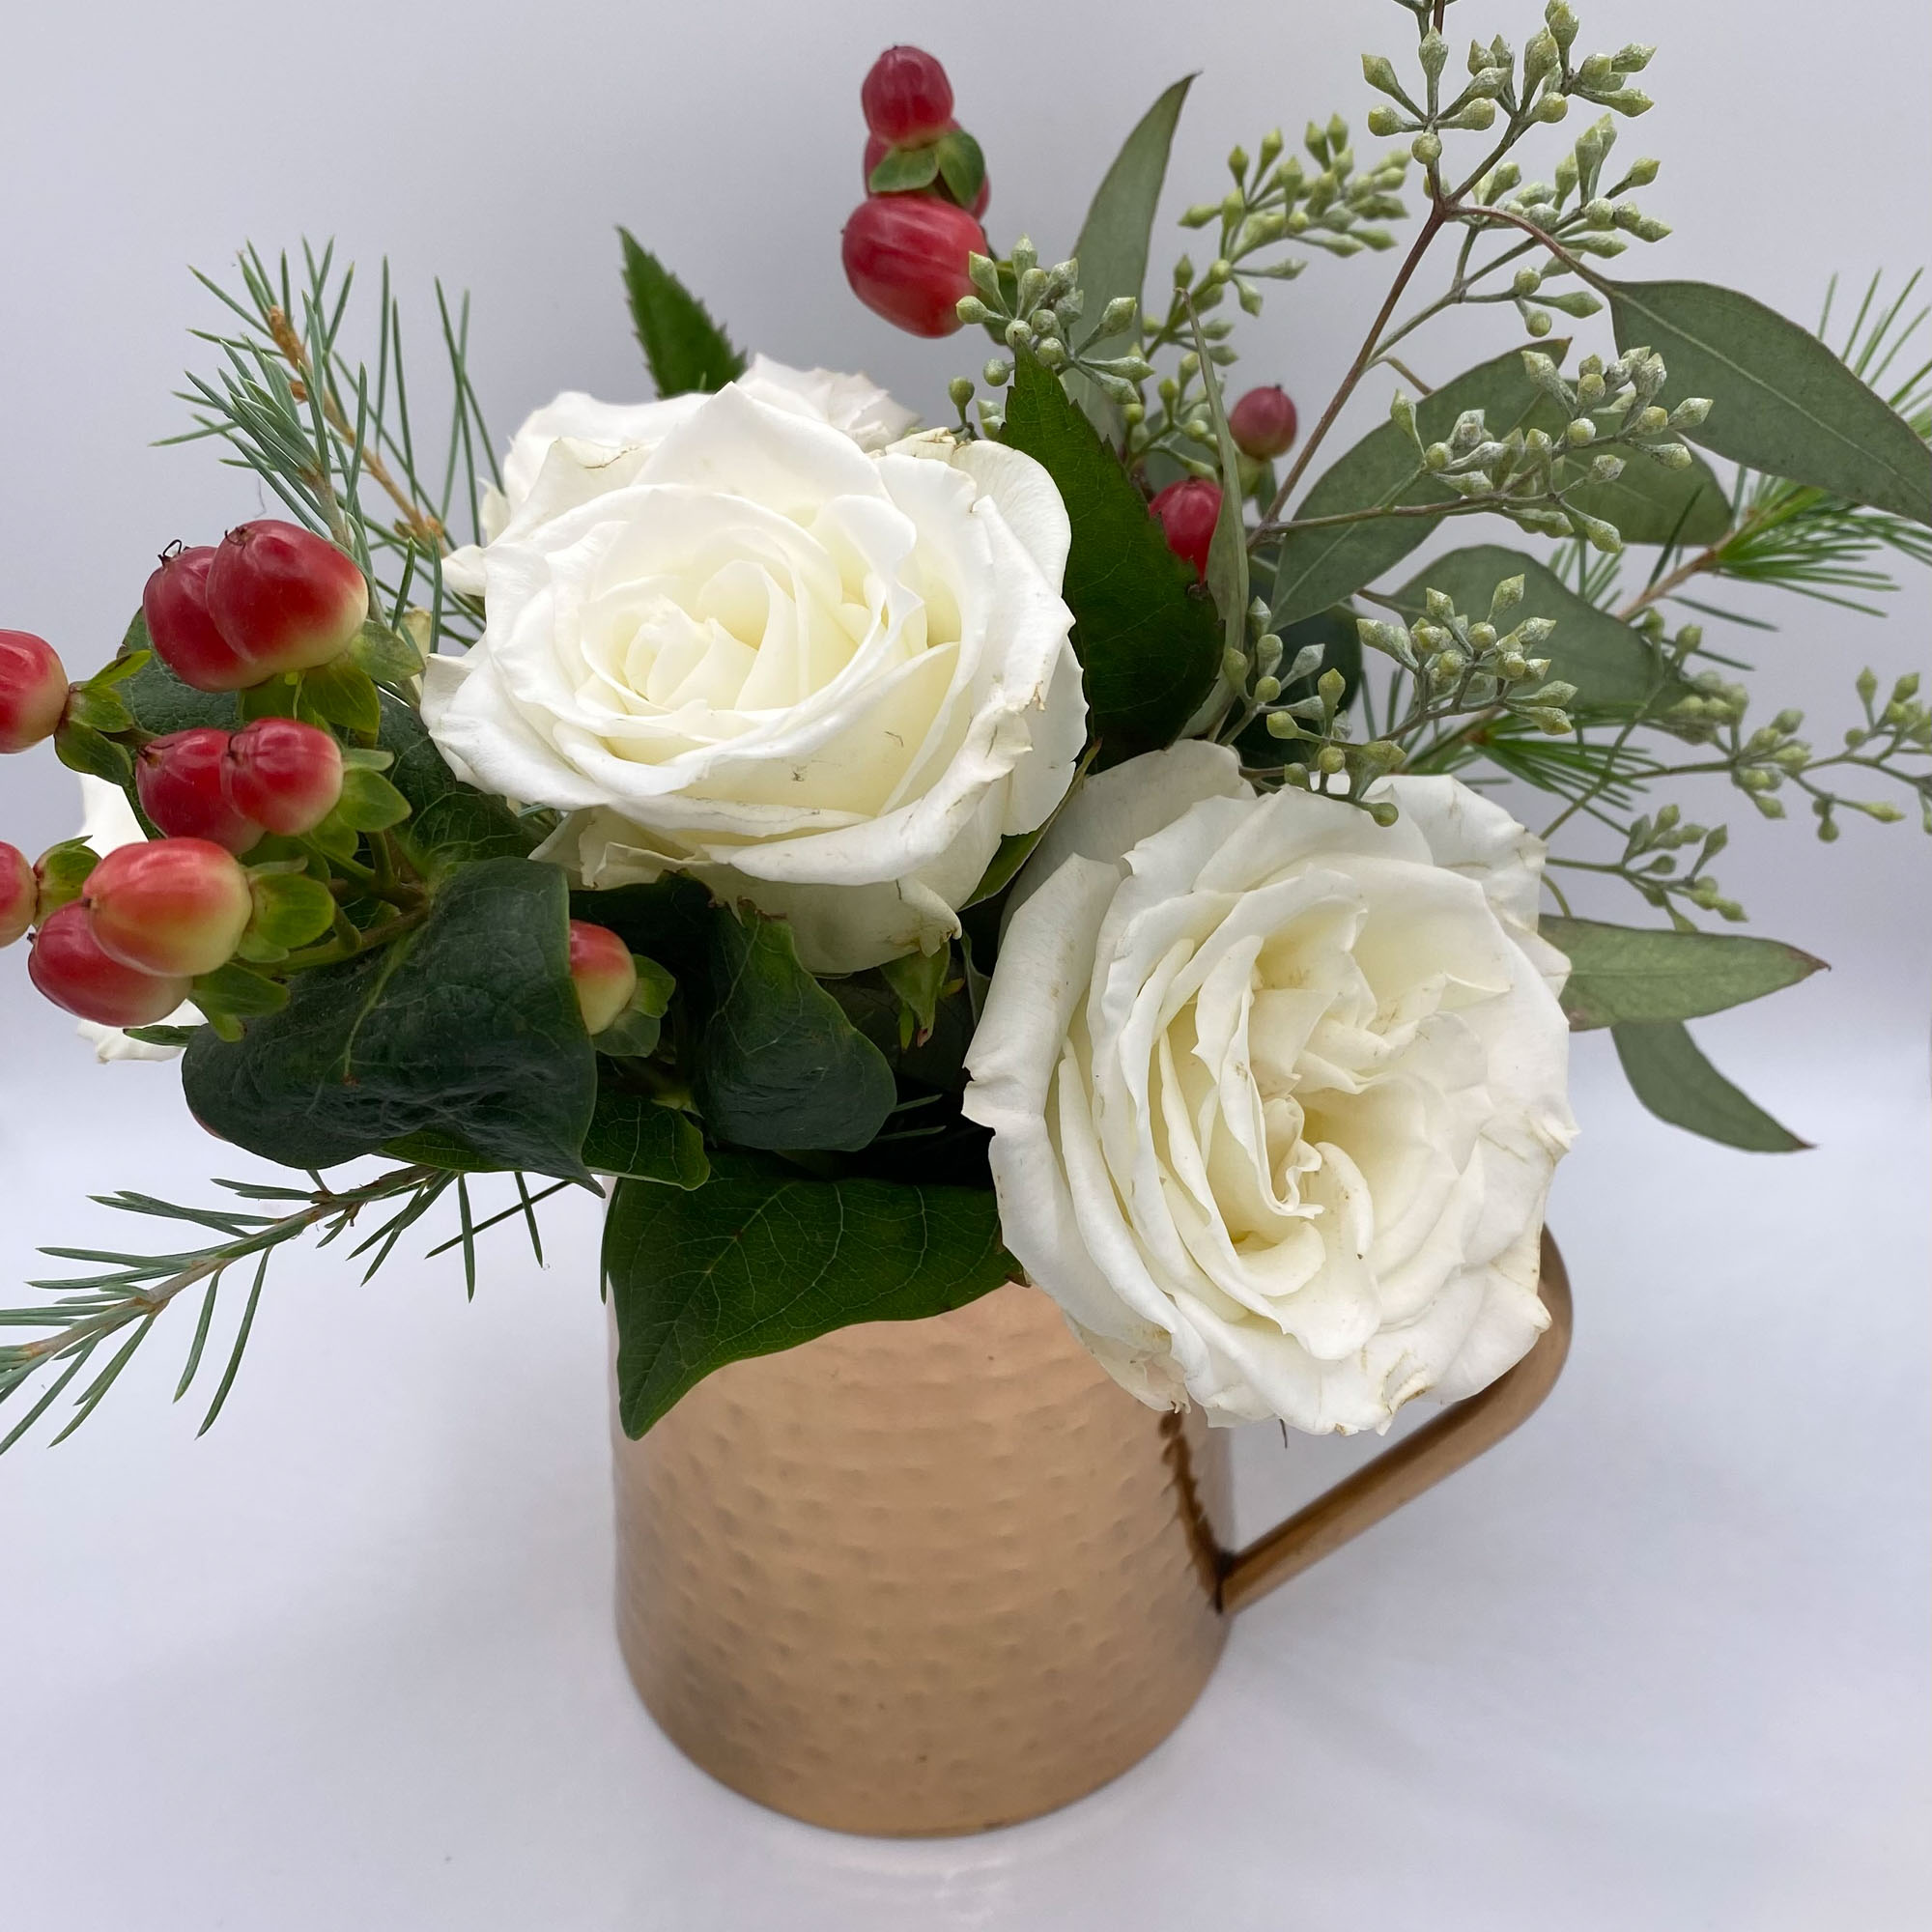 Floral arrangement in a shiny mug, including white roses and other plants.